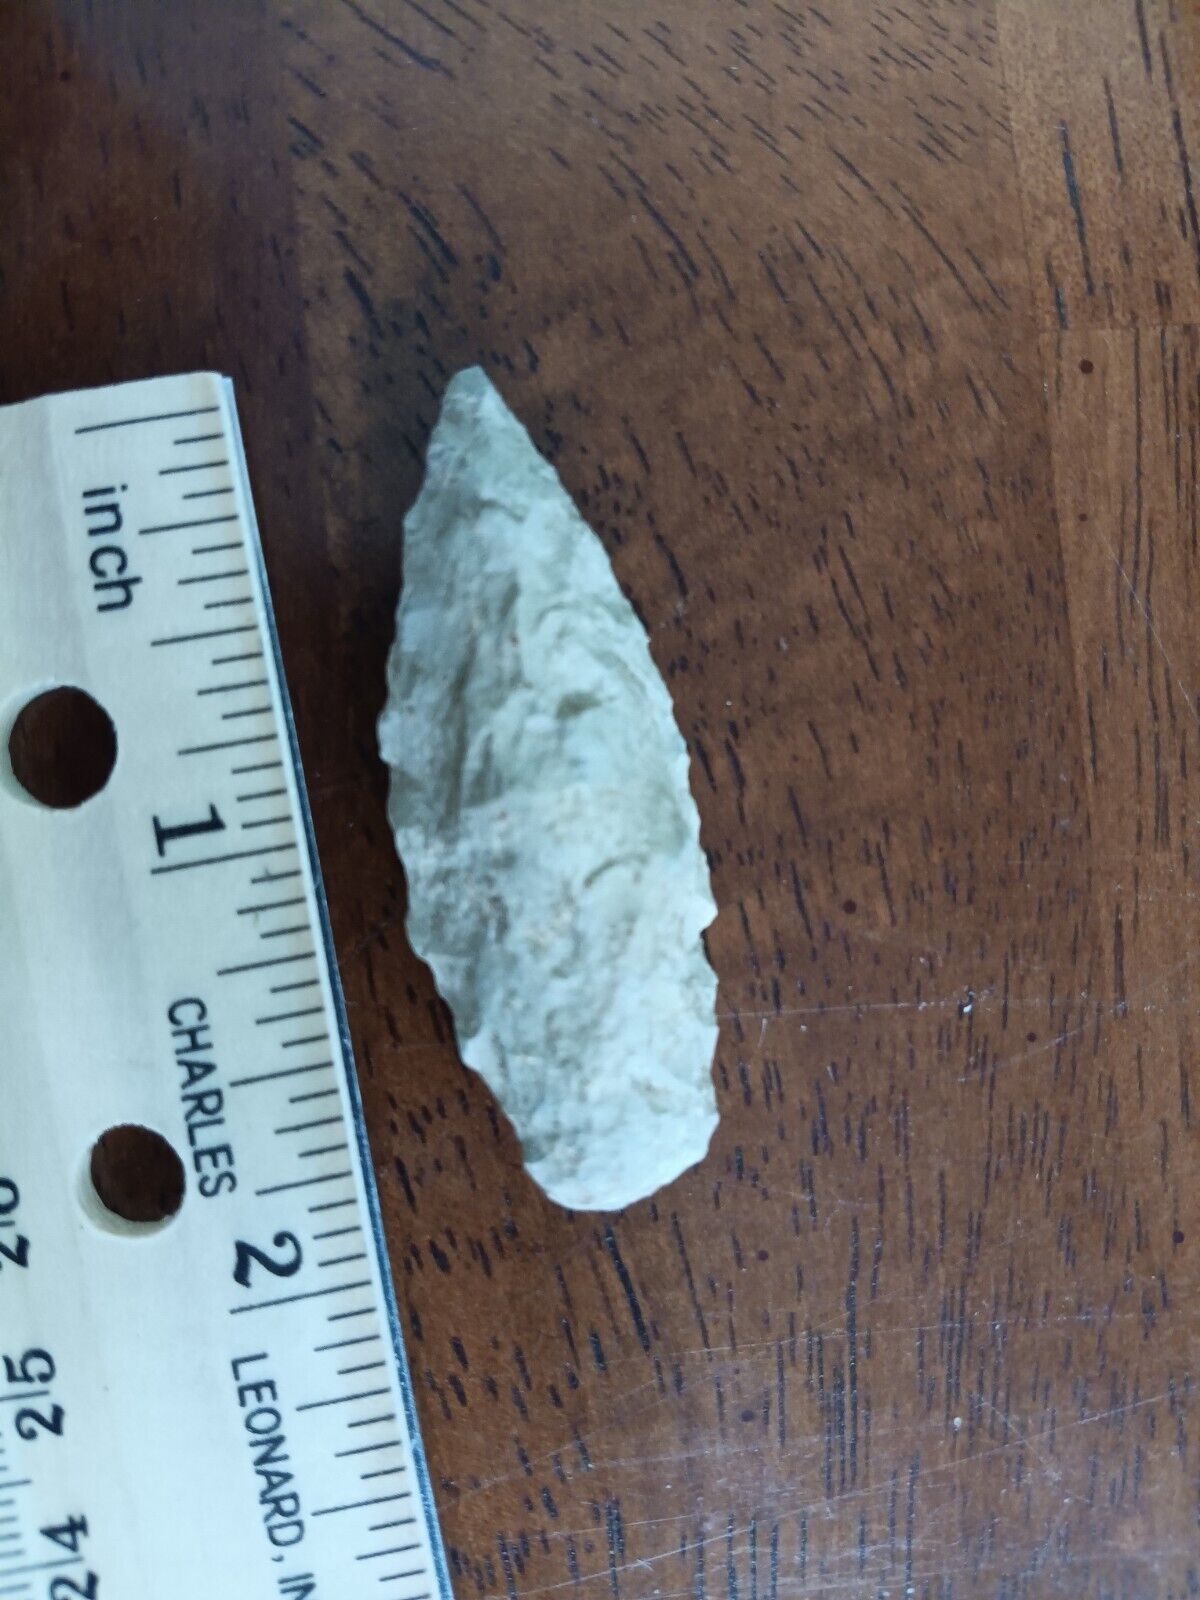 AUTHENTIC NATIVE AMERICAN INDIAN ARTIFACT FOUND, EASTERN N.C.--- ZZZ/82